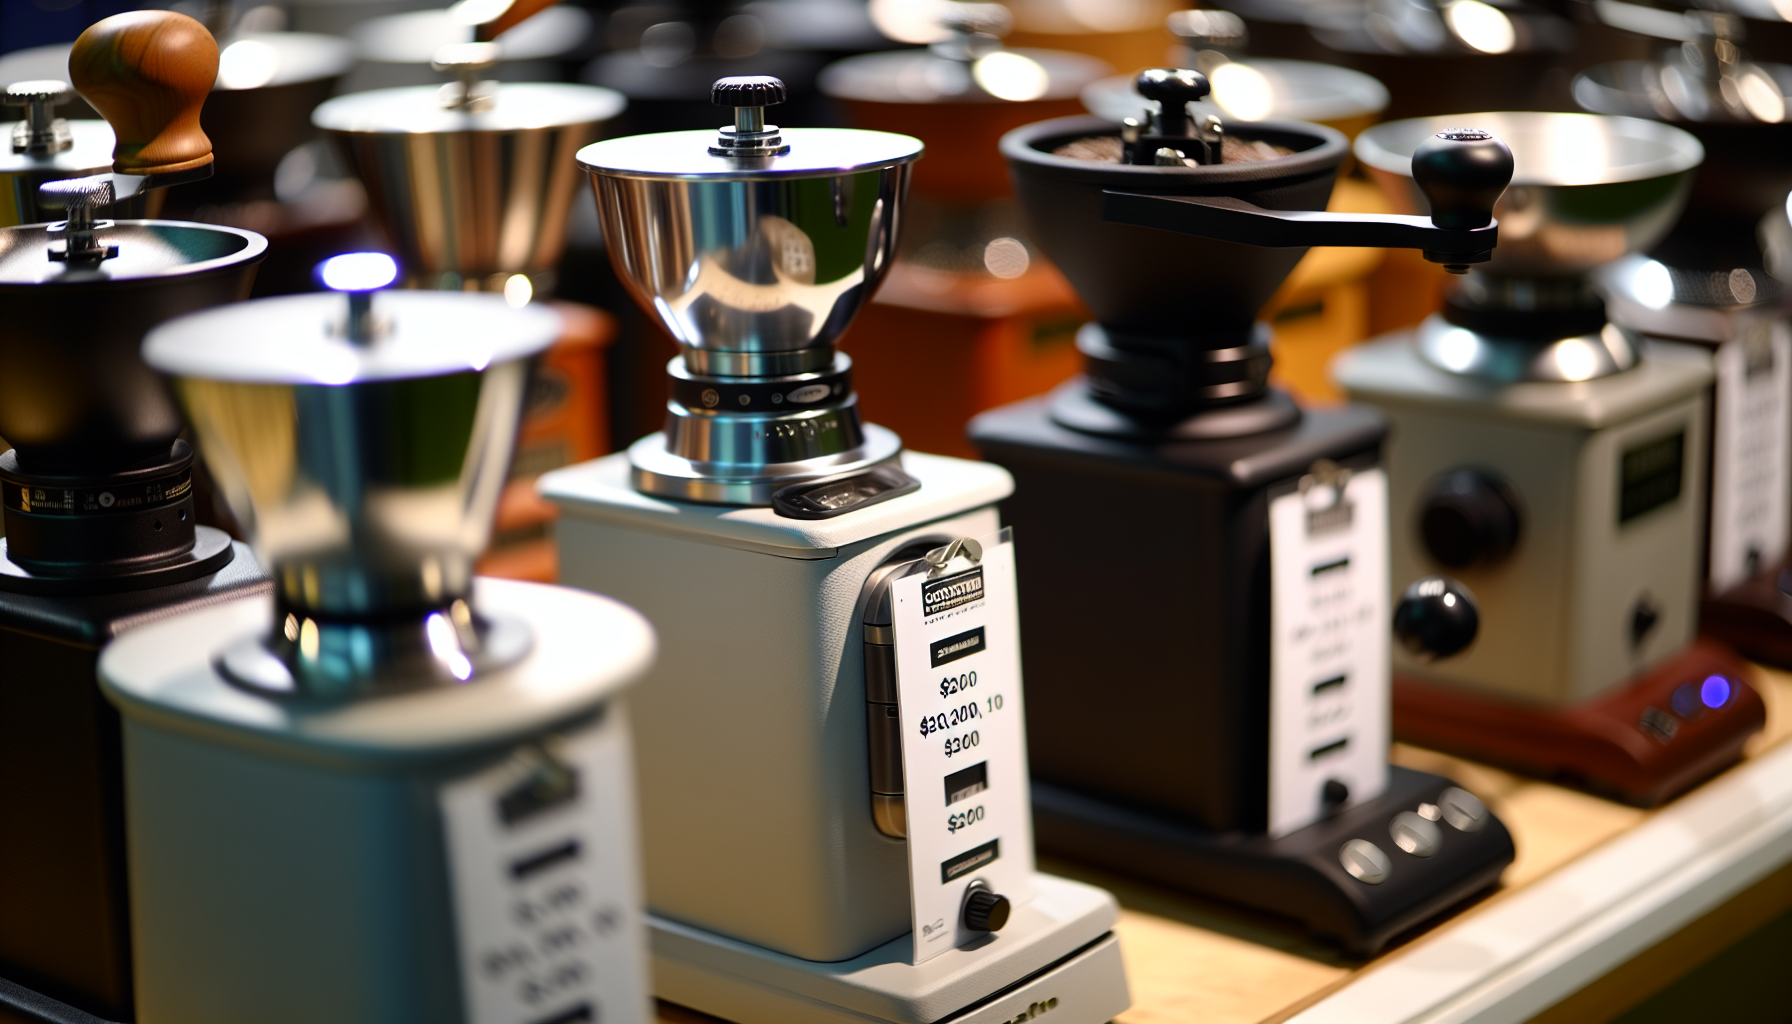 Balancing price and performance of coffee grinders